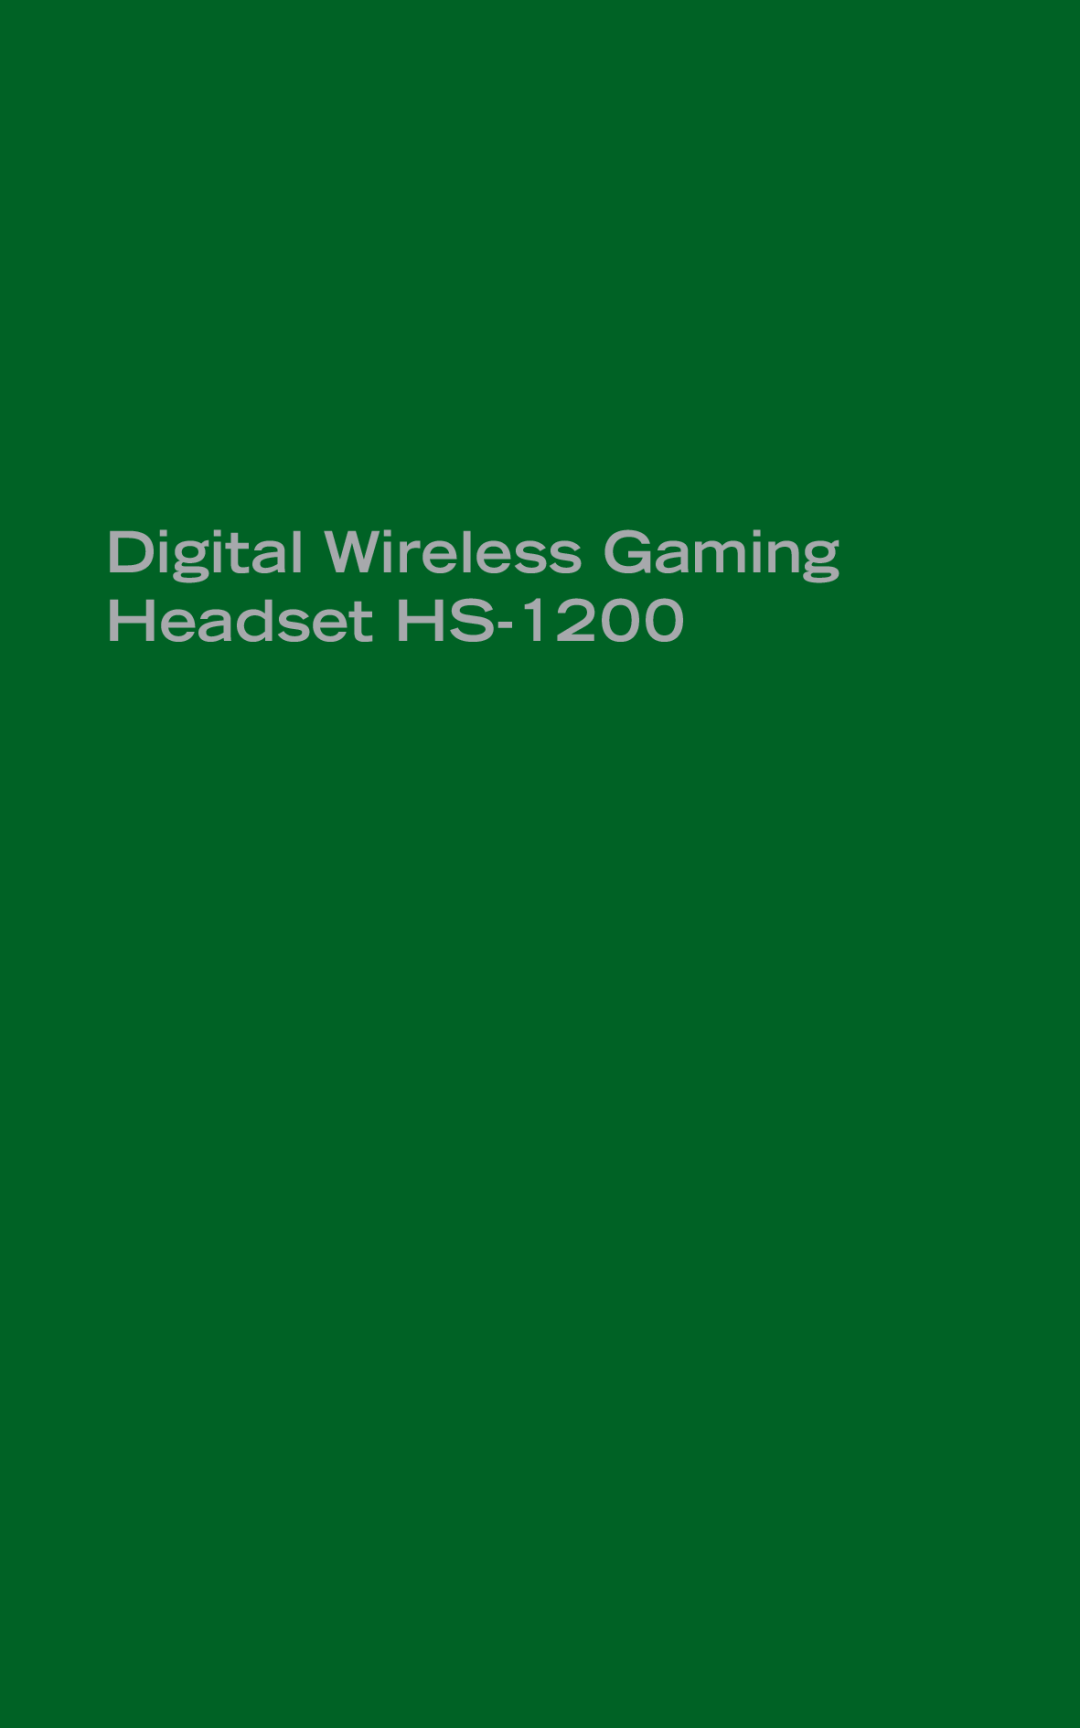 Creative manual Contents, Digital Wireless Gaming Headset HS-1200 